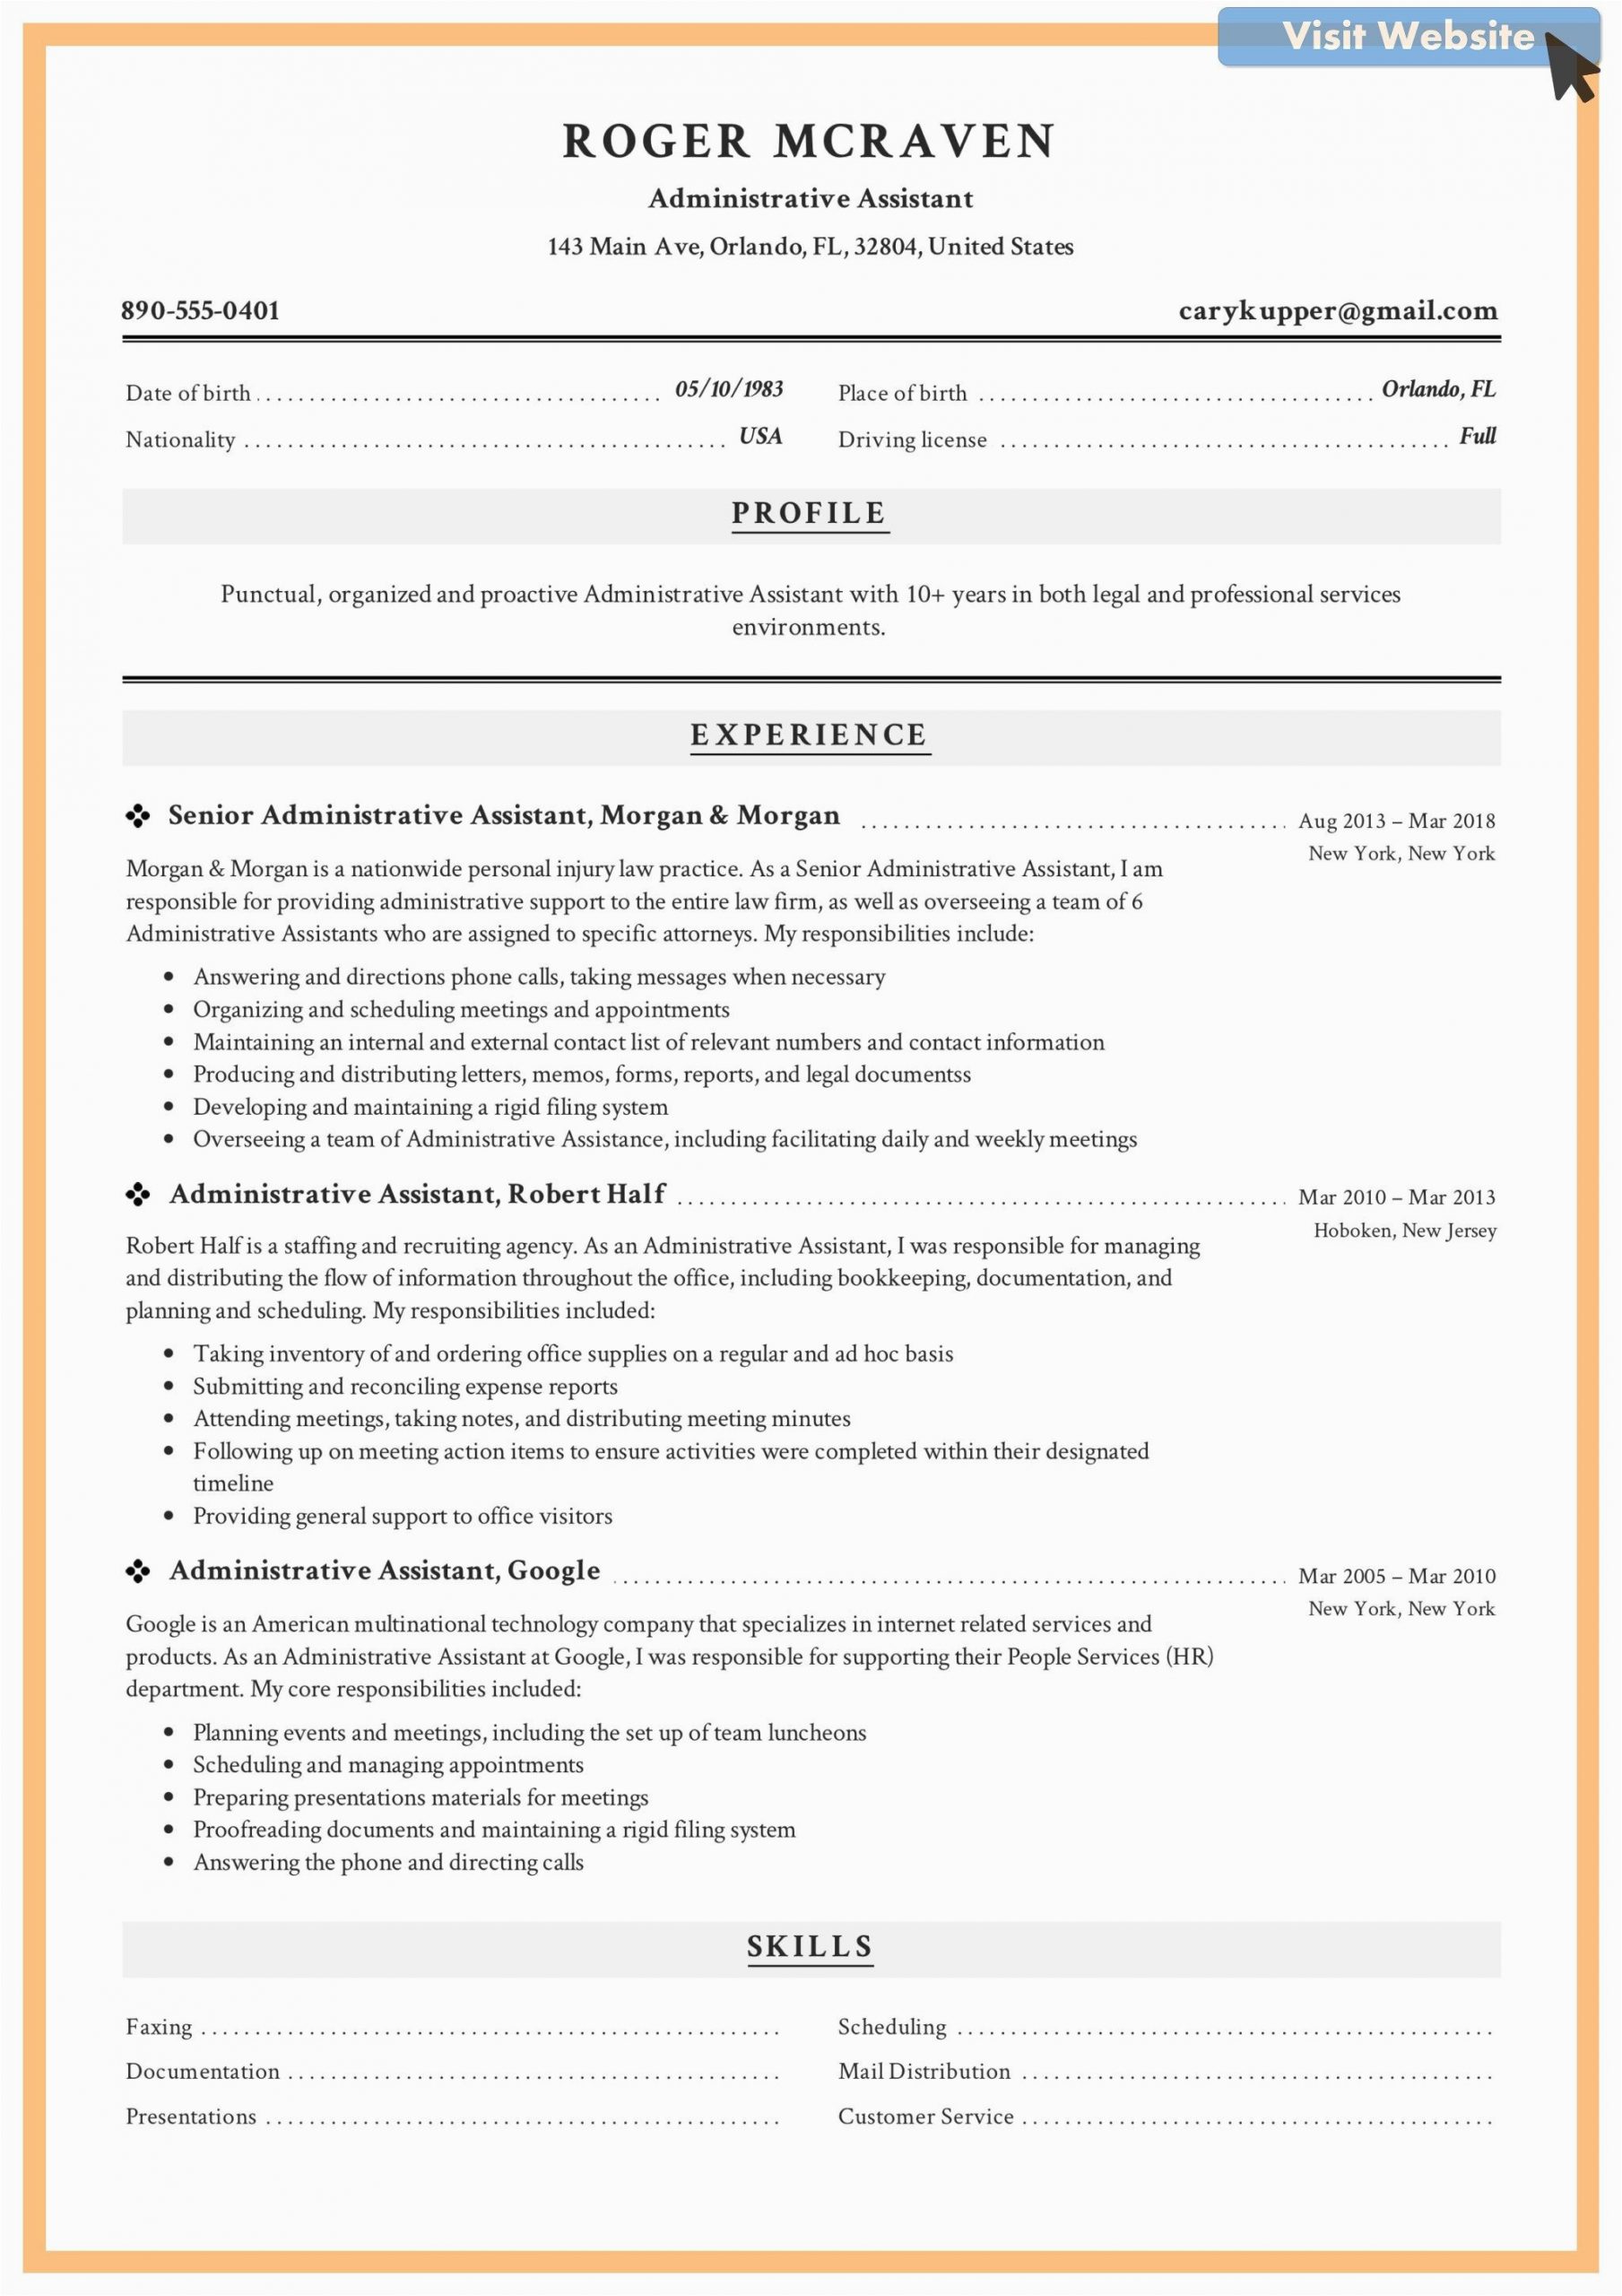 Skills Based Resume Template Administrative assistant Best Executive assistant Resume Samples Good Resume Examples